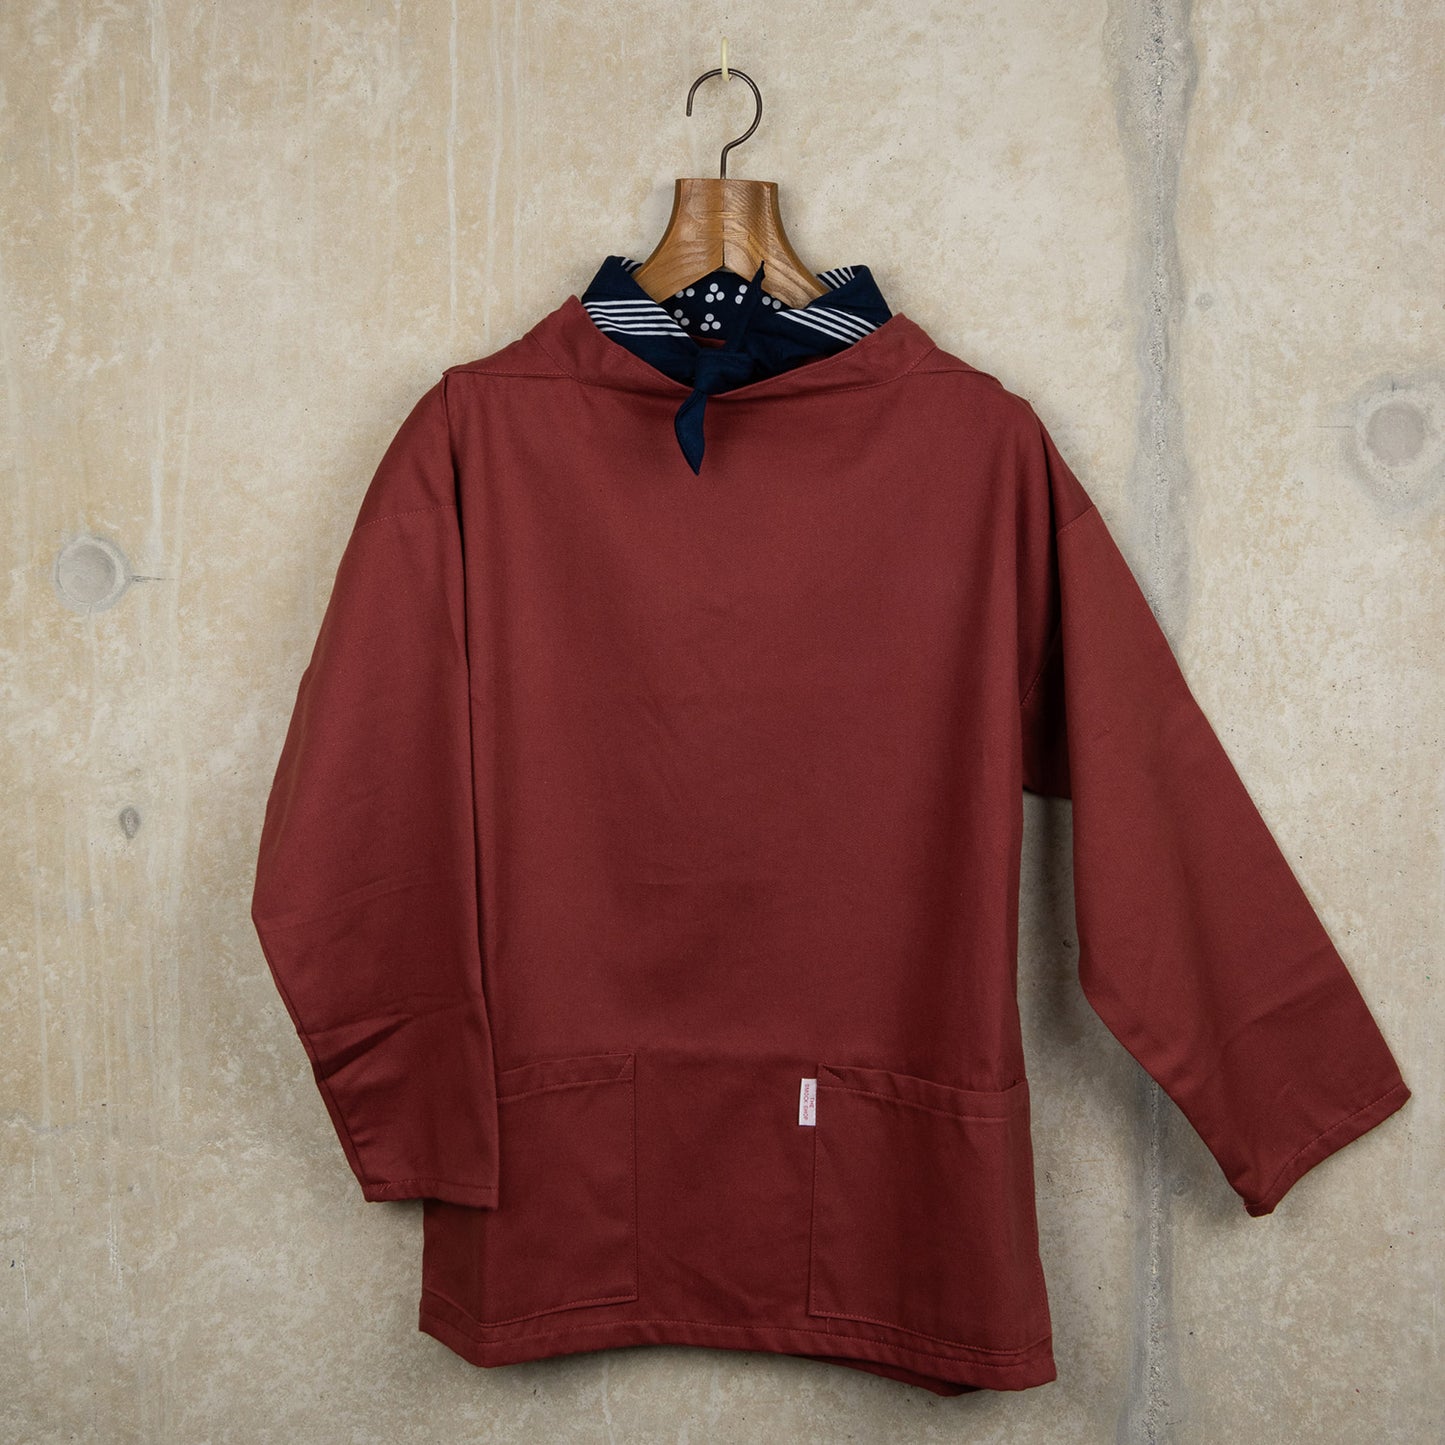 Breton red smock with crew neck, full-length sleeves and two front pockets